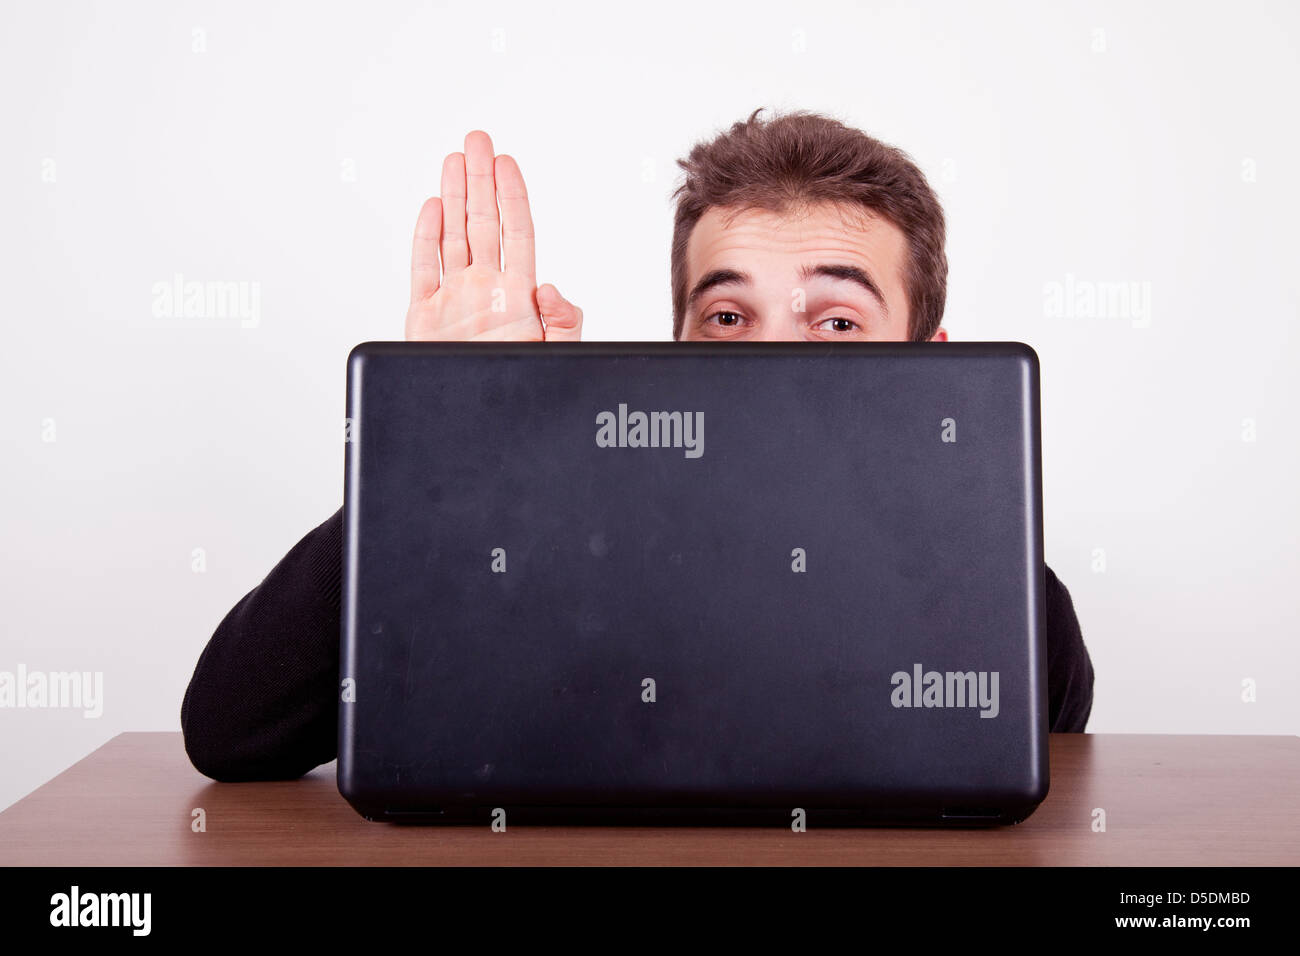 shy young man waving hello from behind a laptop screen Stock Photo